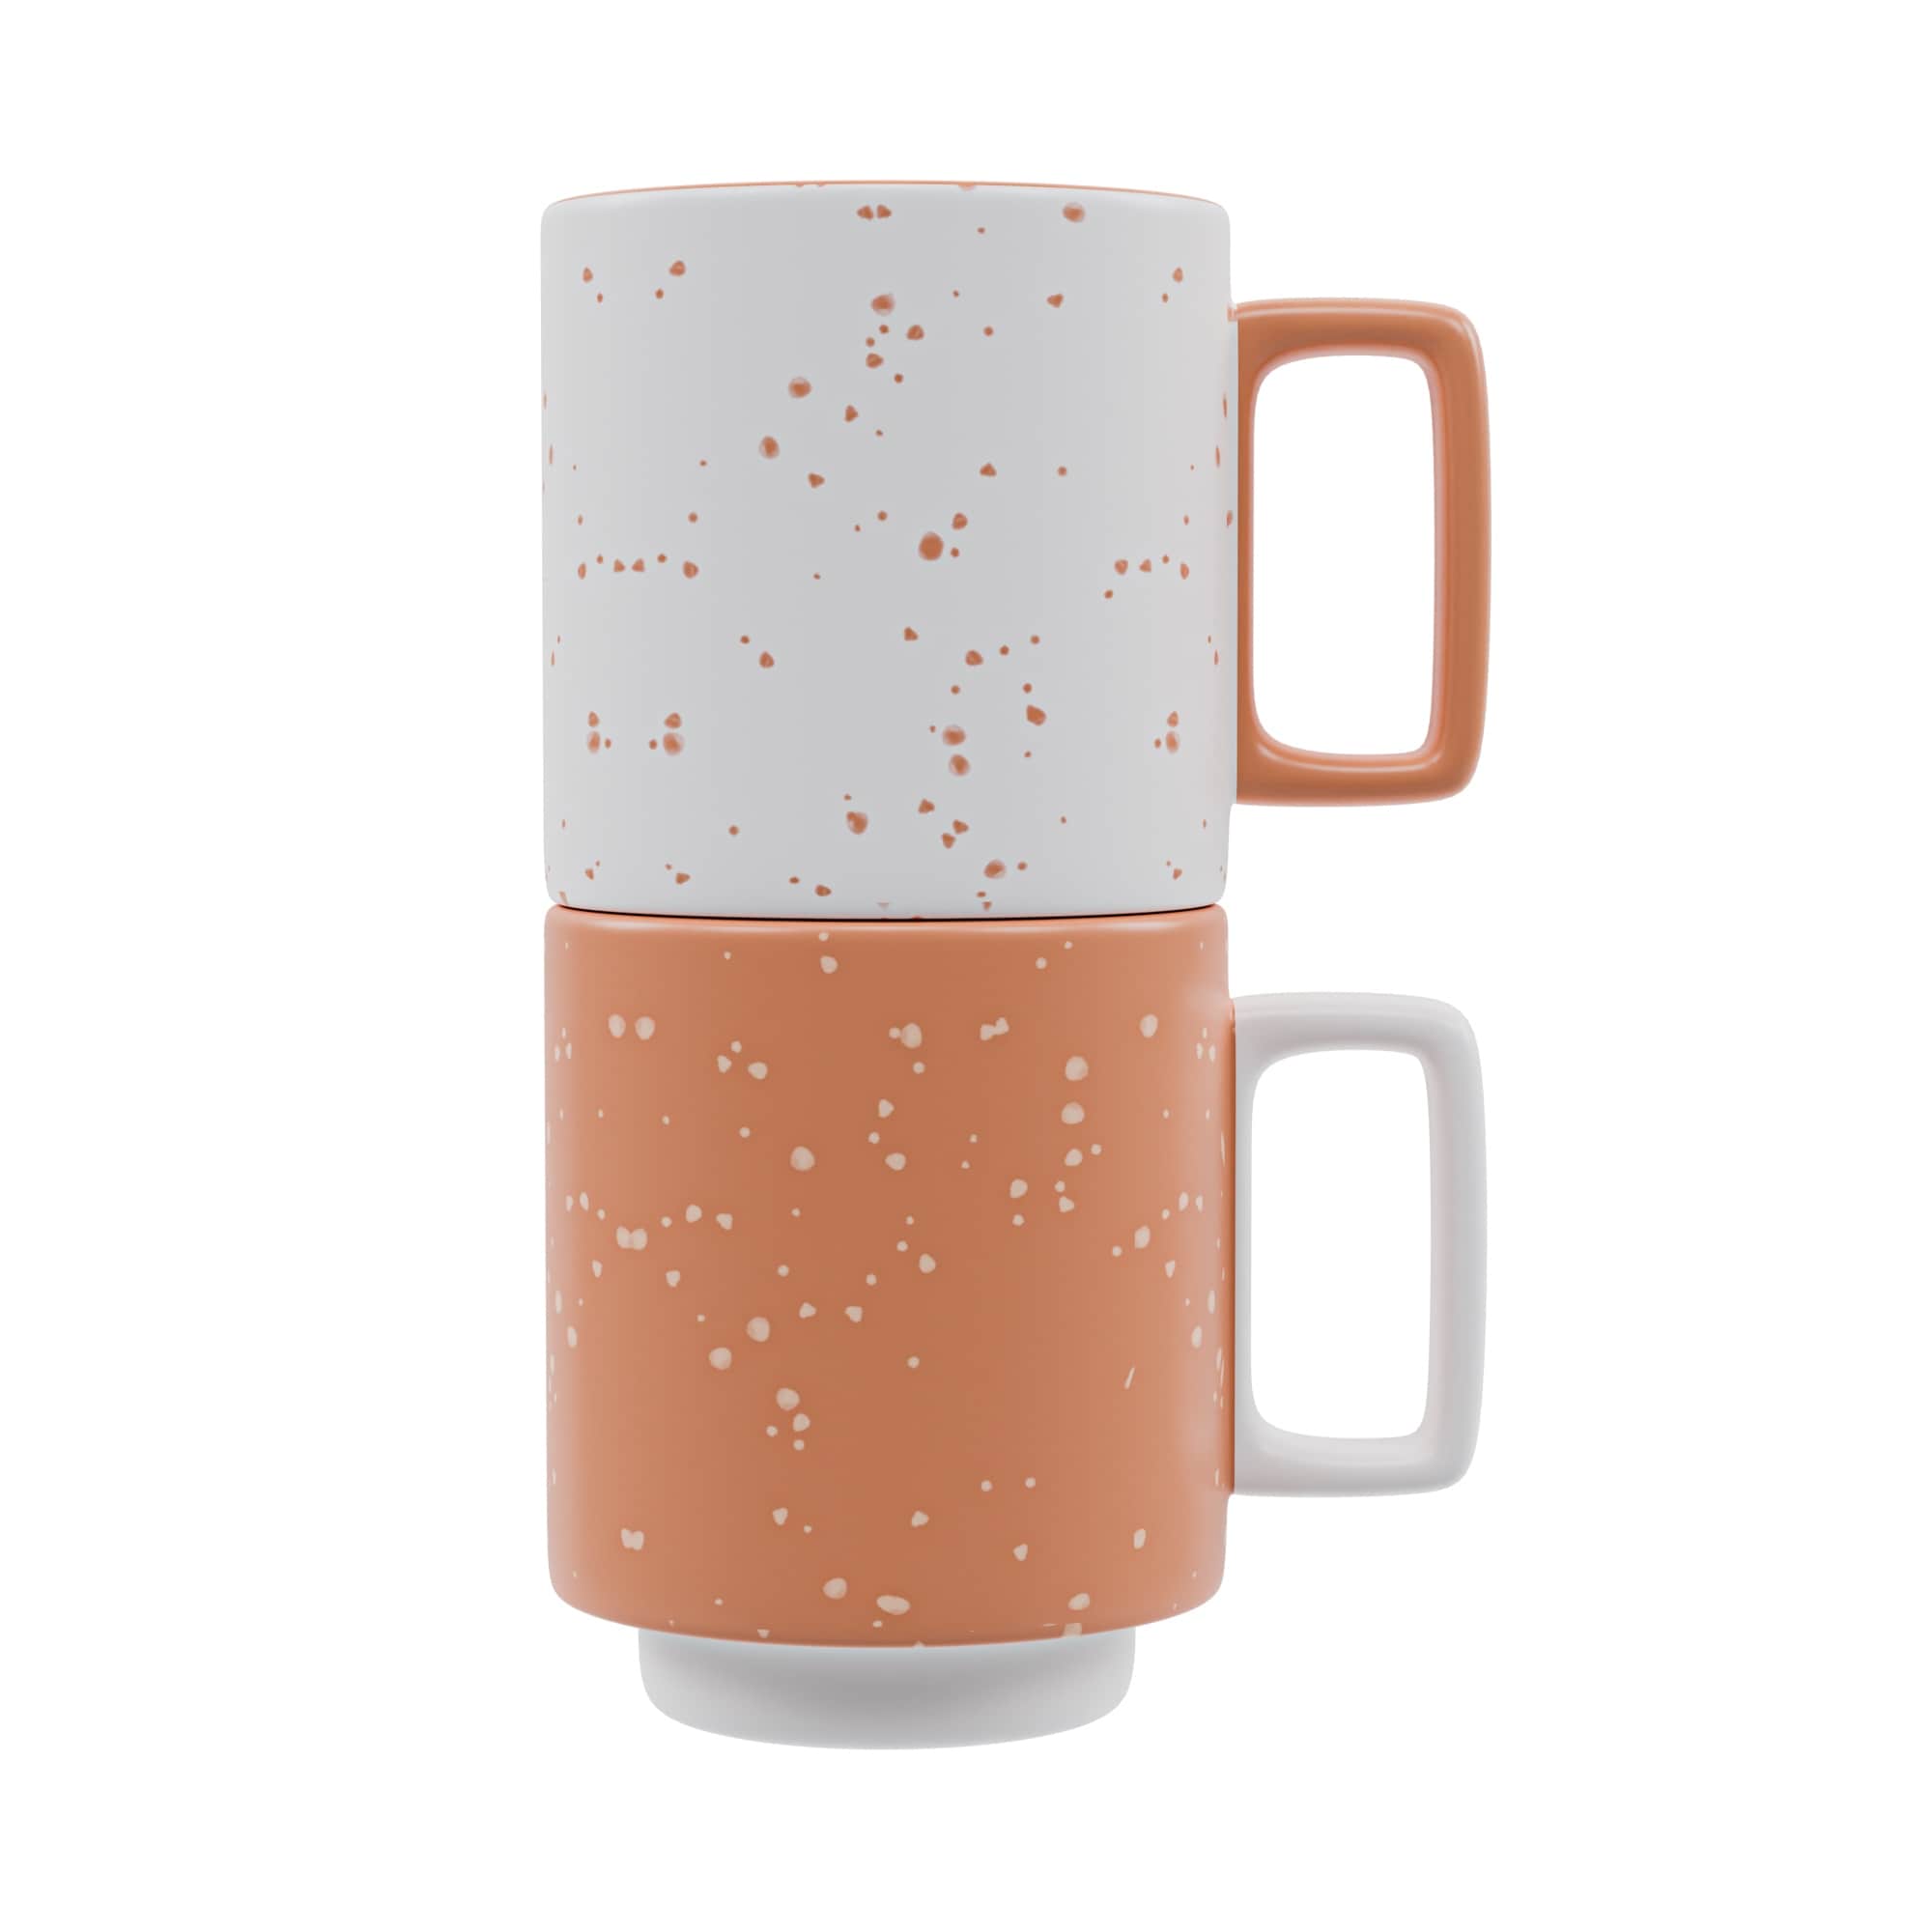 American Atelier Speckled Stackable Mugs Set of 2